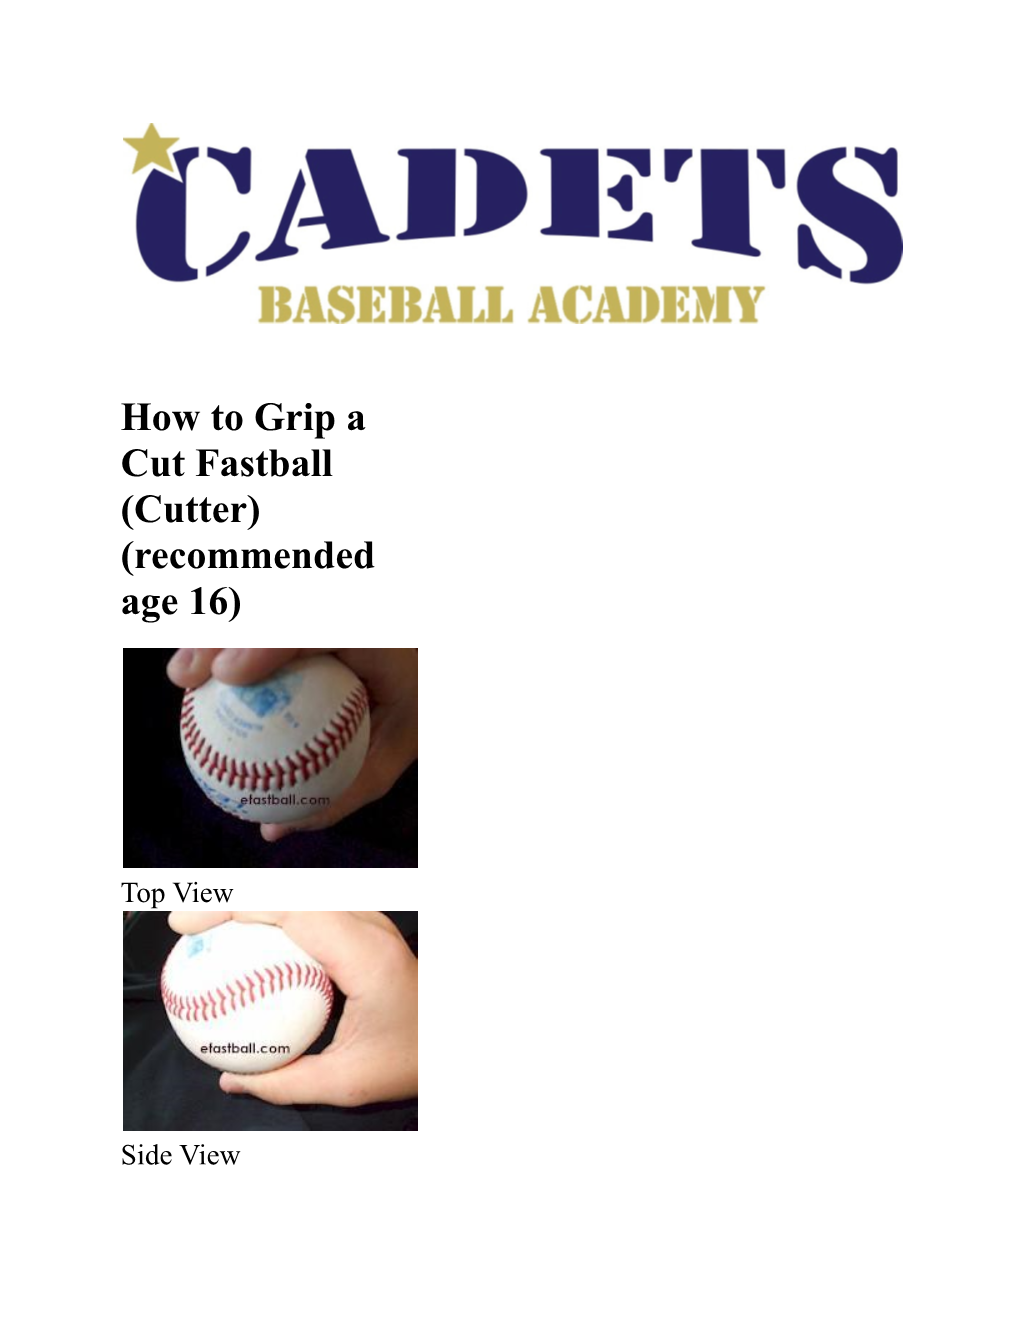 How to Grip a Cut Fastball (Cutter) (Recommended Age 16)